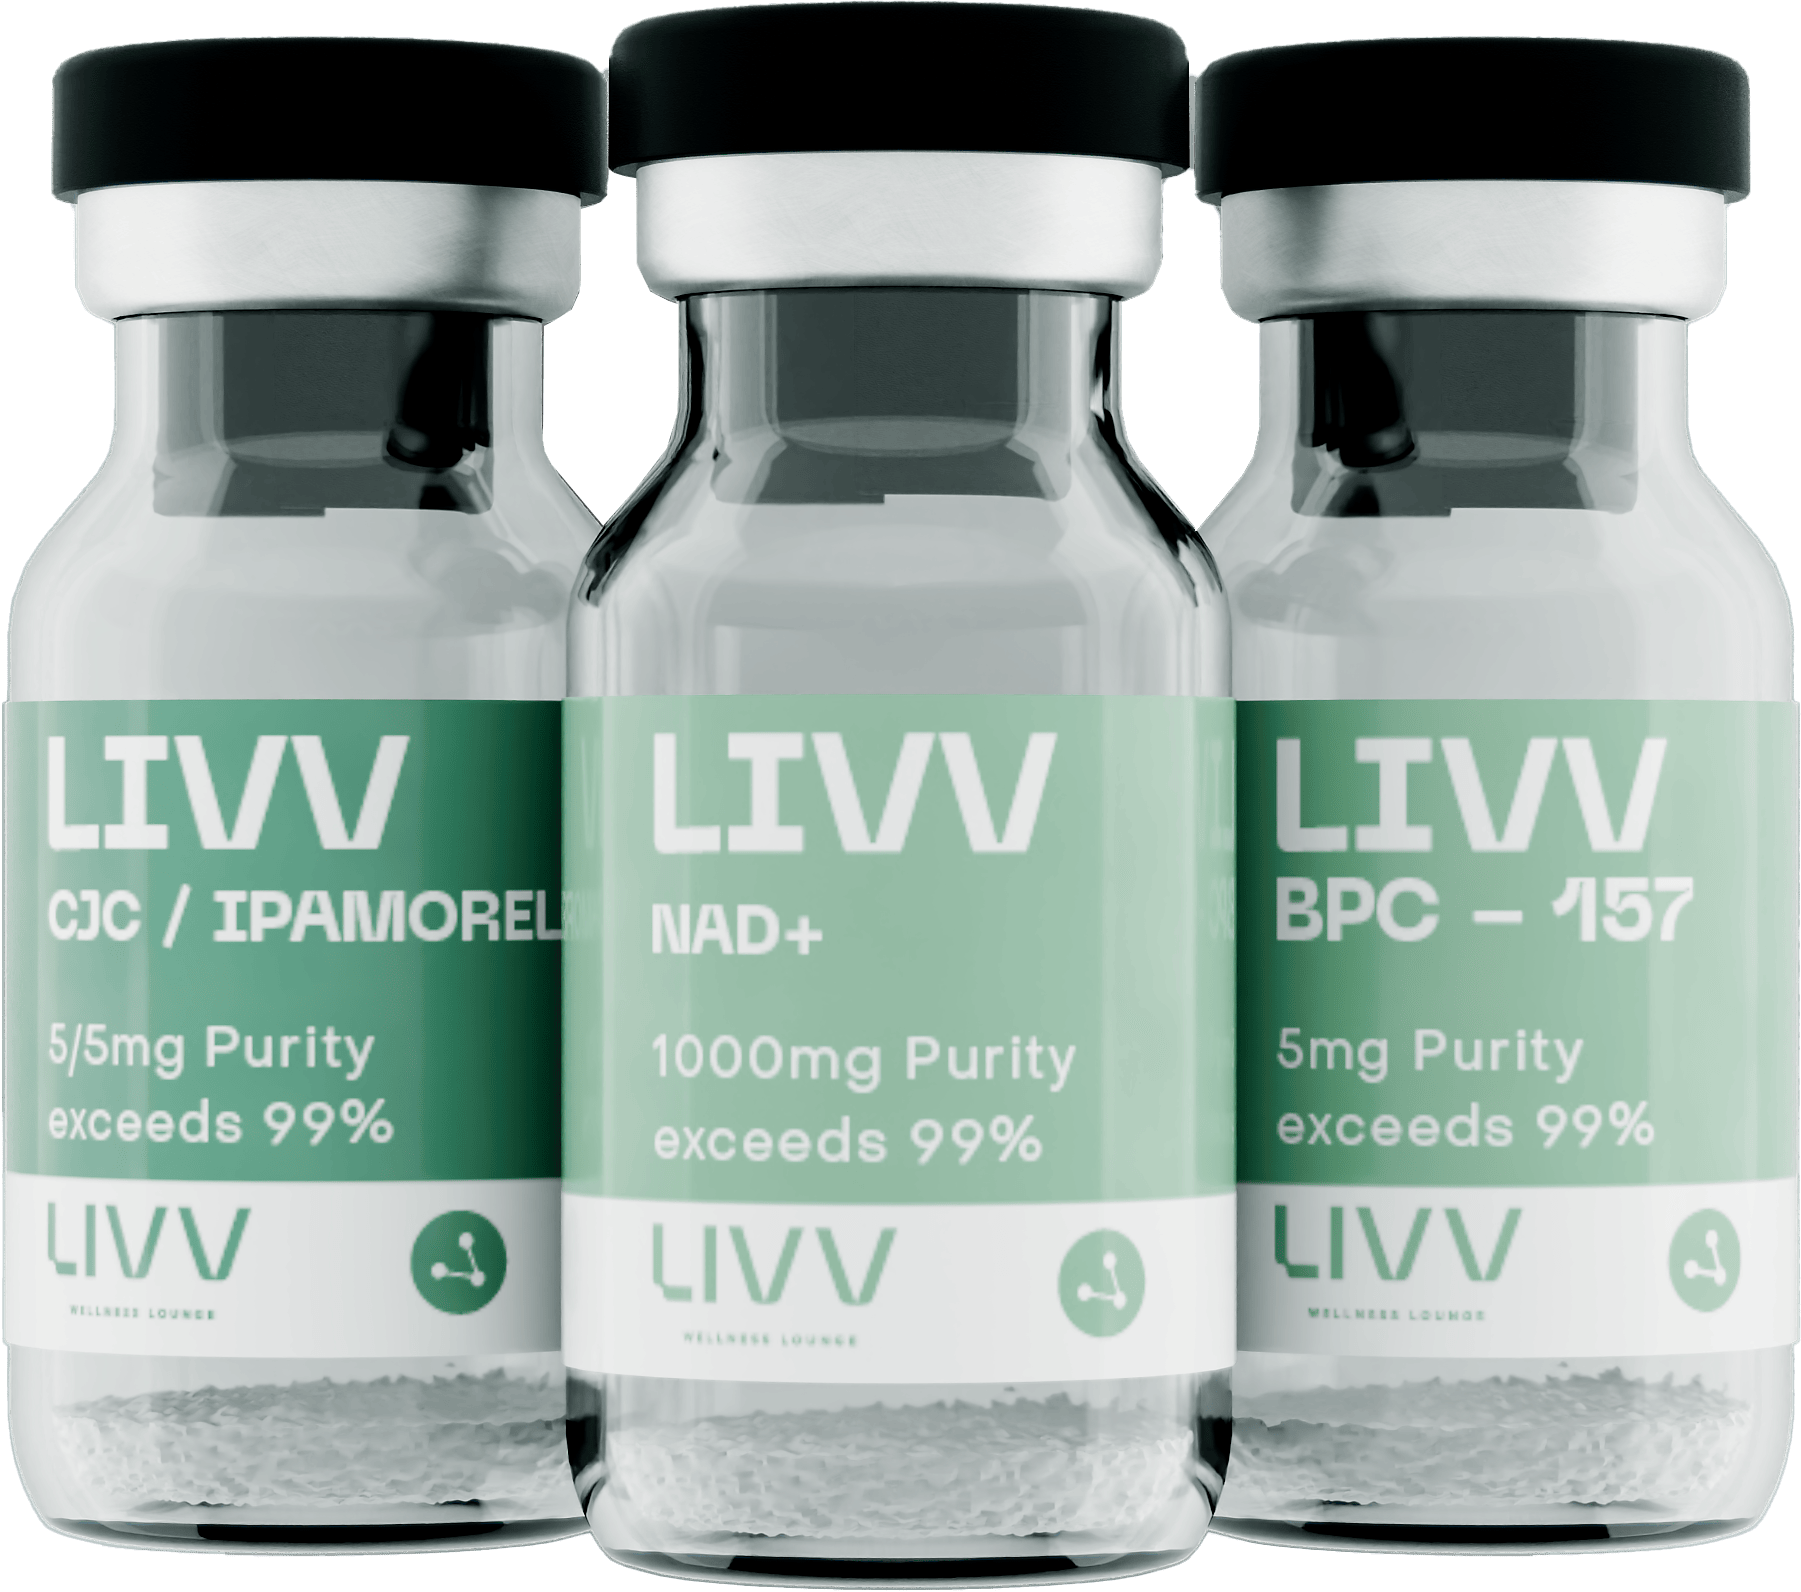 LIVV Sex Life - Peptide Blend for Sexual Health-CJC/IPAMORELIN, NAD+, BPC-157